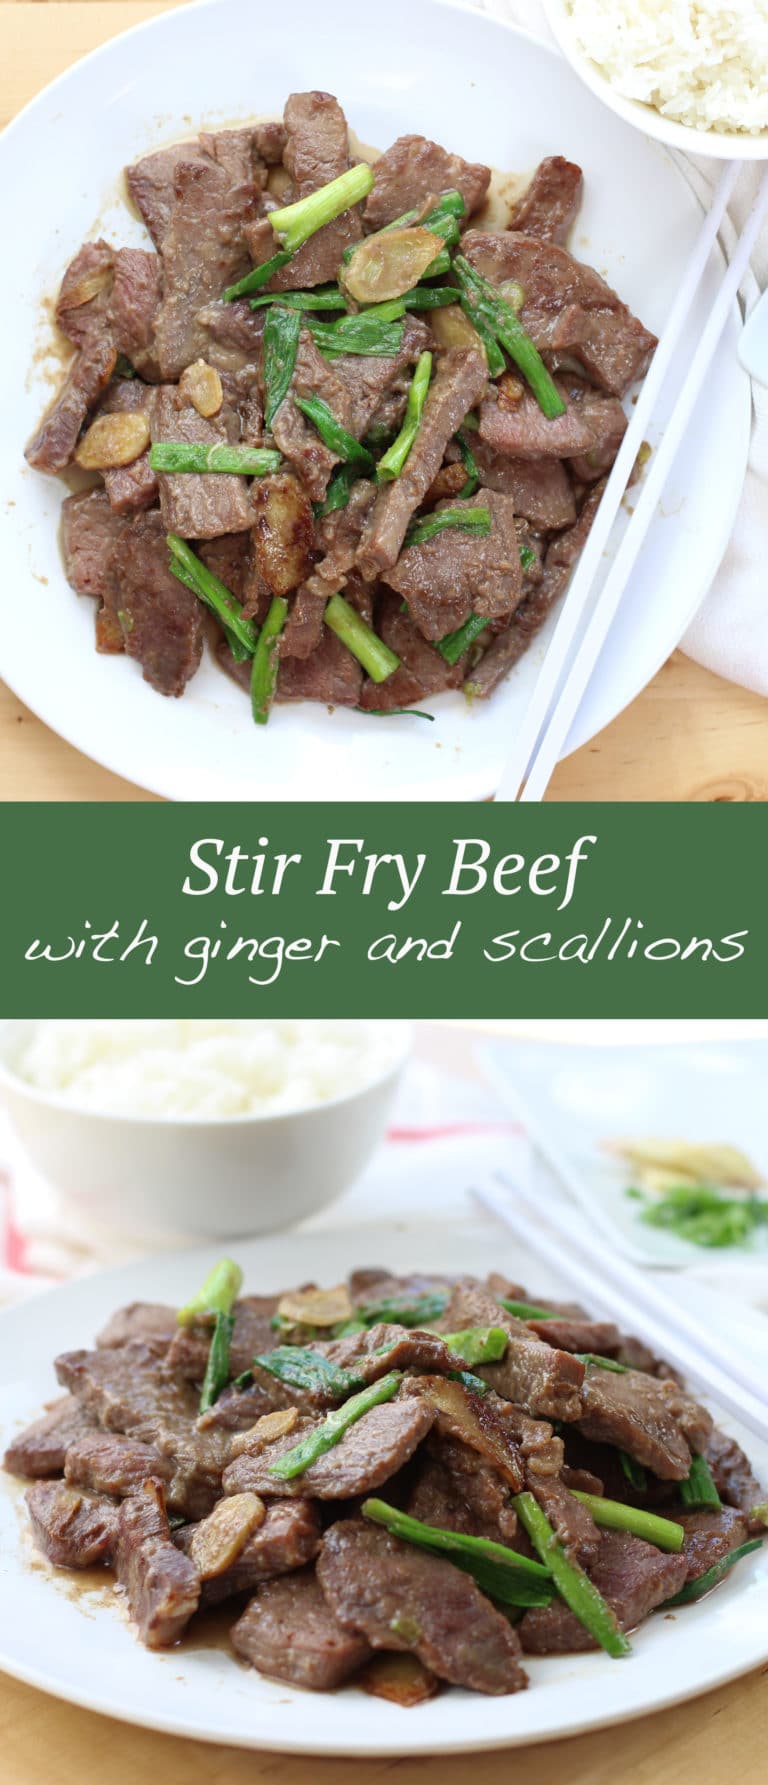 Stir Fry Beef with Ginger and Scallions - Joyous Apron